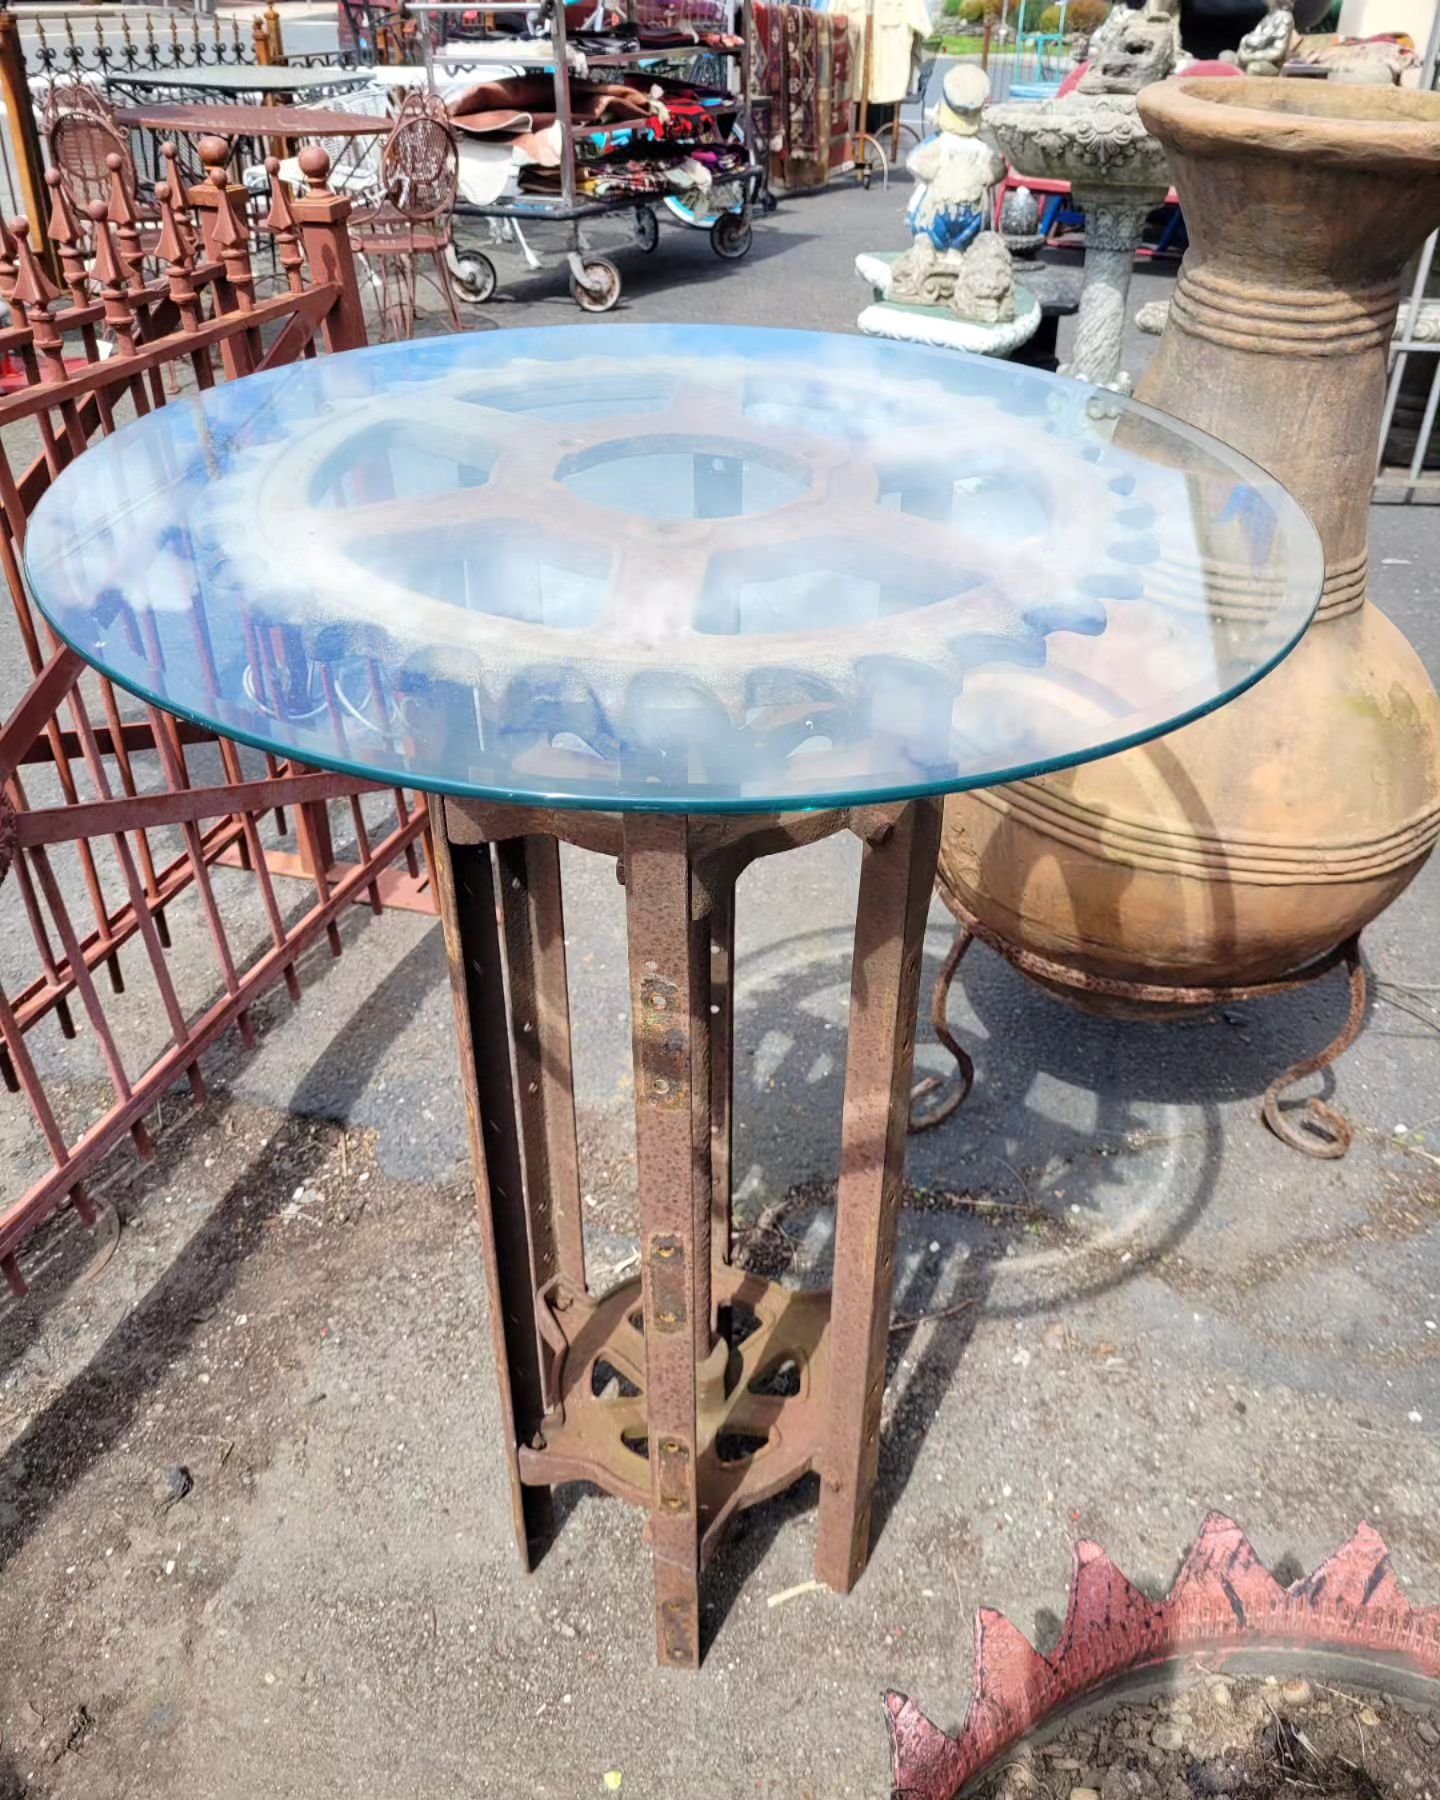 Reclaimed table with glass top 

28&quot; diameter 
38&quot; tall 

$225 

#mergegallery #frenchtownnj #reclaimed #table #reclaimedfurniture #industrialdesign #industrial #interiordesign #glasstoptable #homedecor #hunterdoncounty #newjersey